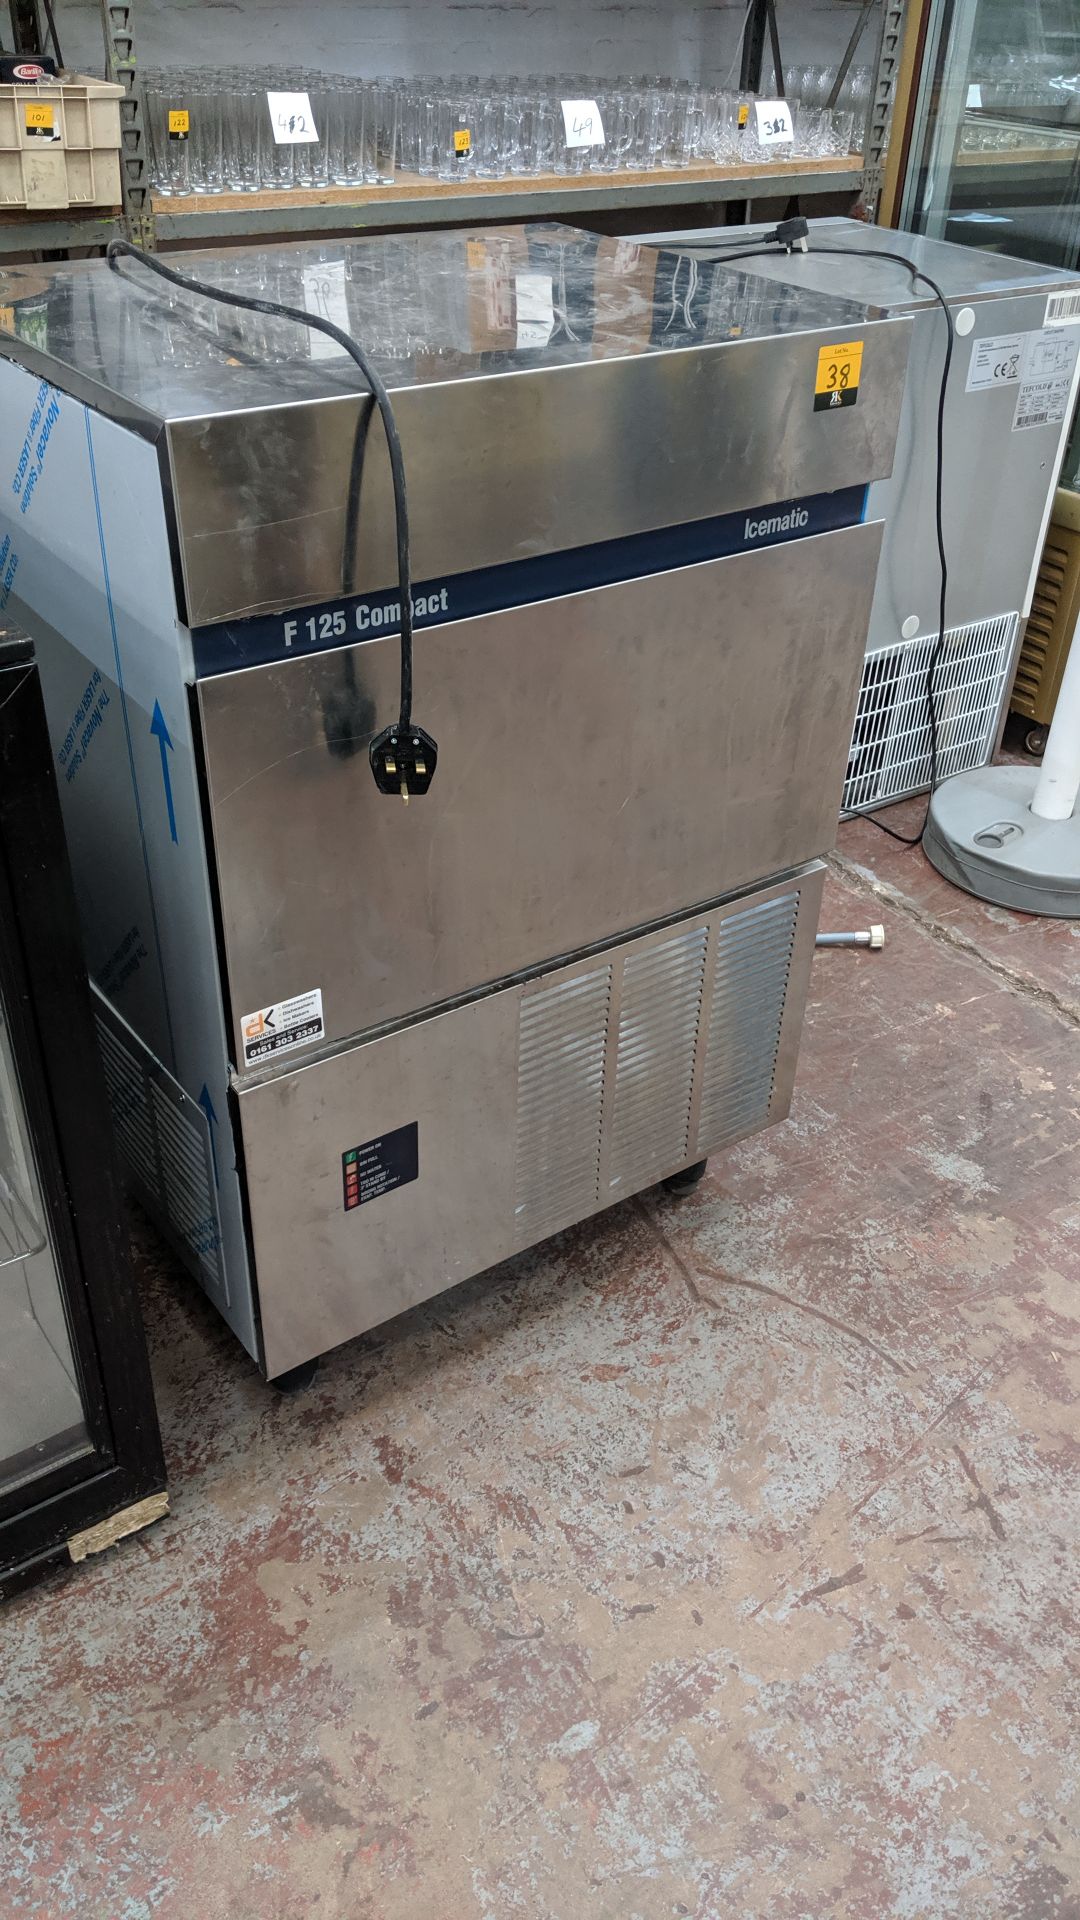 Icematic F125 compact ice machine IMPORTANT: Please remember goods successfully bid upon must be